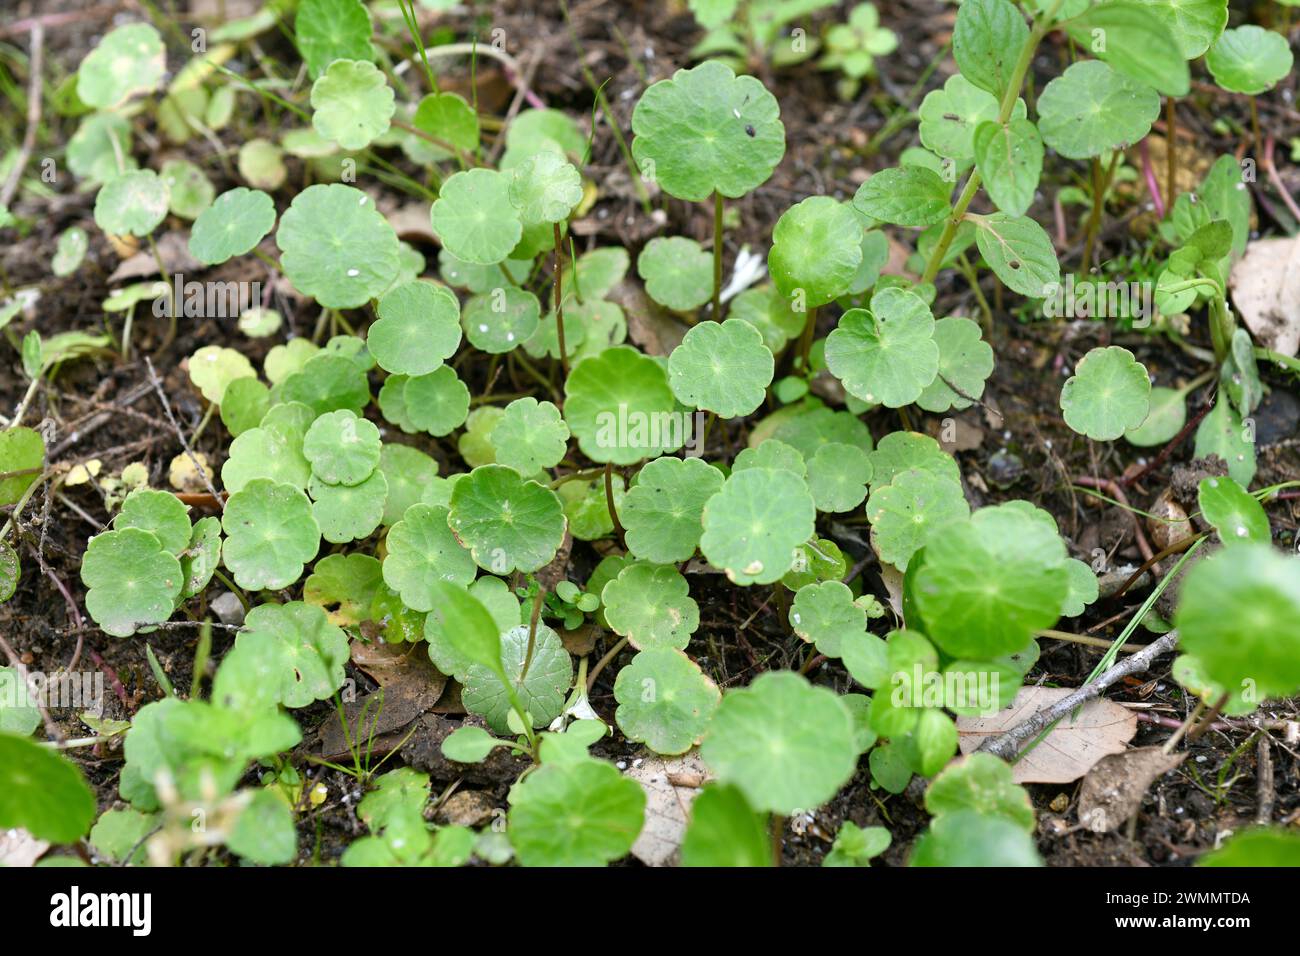 Pennywort (Hydrocotyle vulgaris) is an aquatic perennial herb native to Europe and Turkey. Grows in marshes and peat bogs. Stock Photo